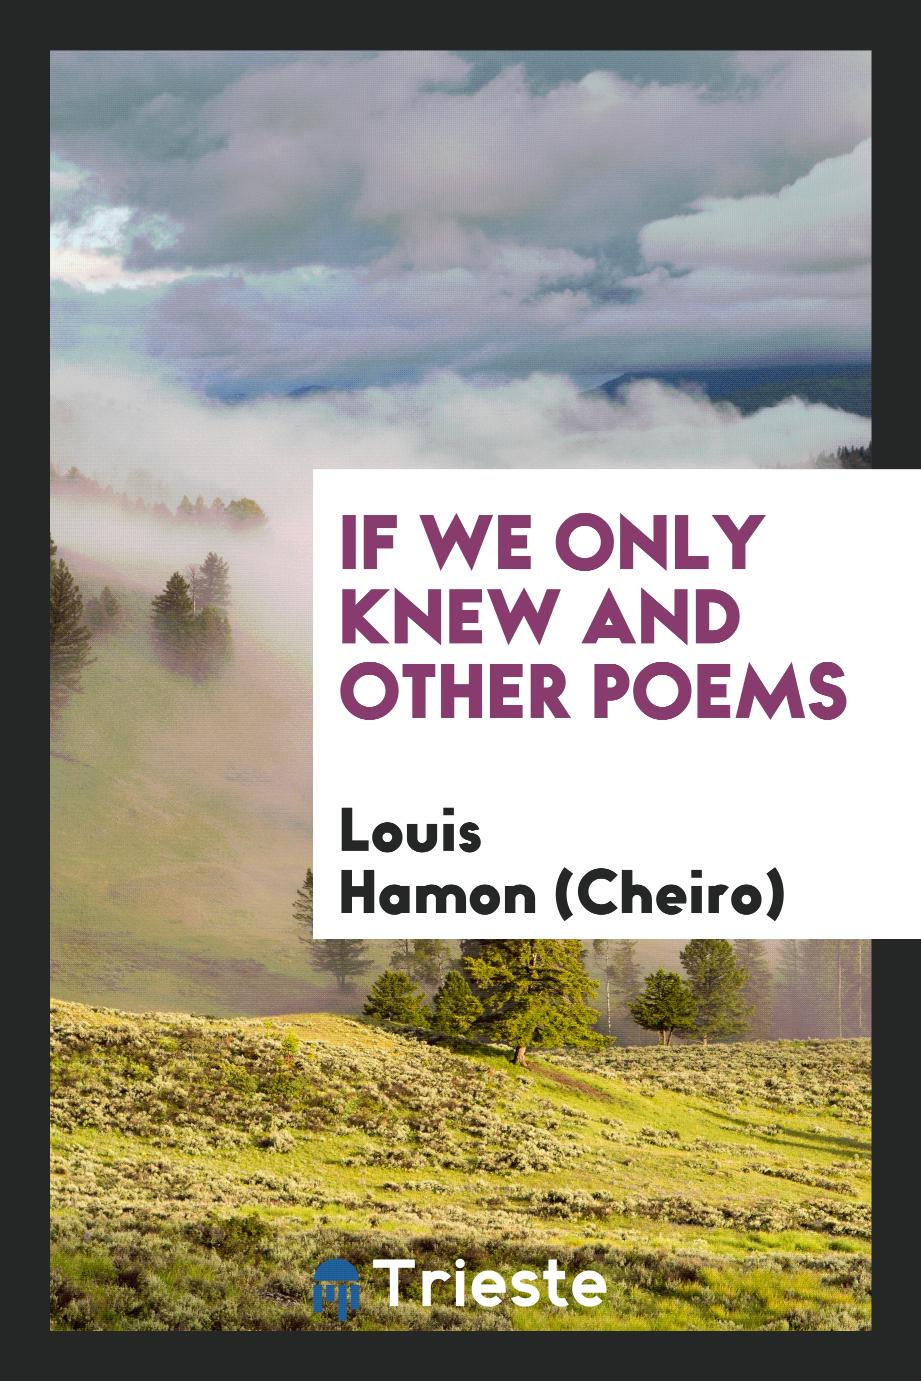 Louis Hamon (Cheiro) - If We Only Knew and Other Poems